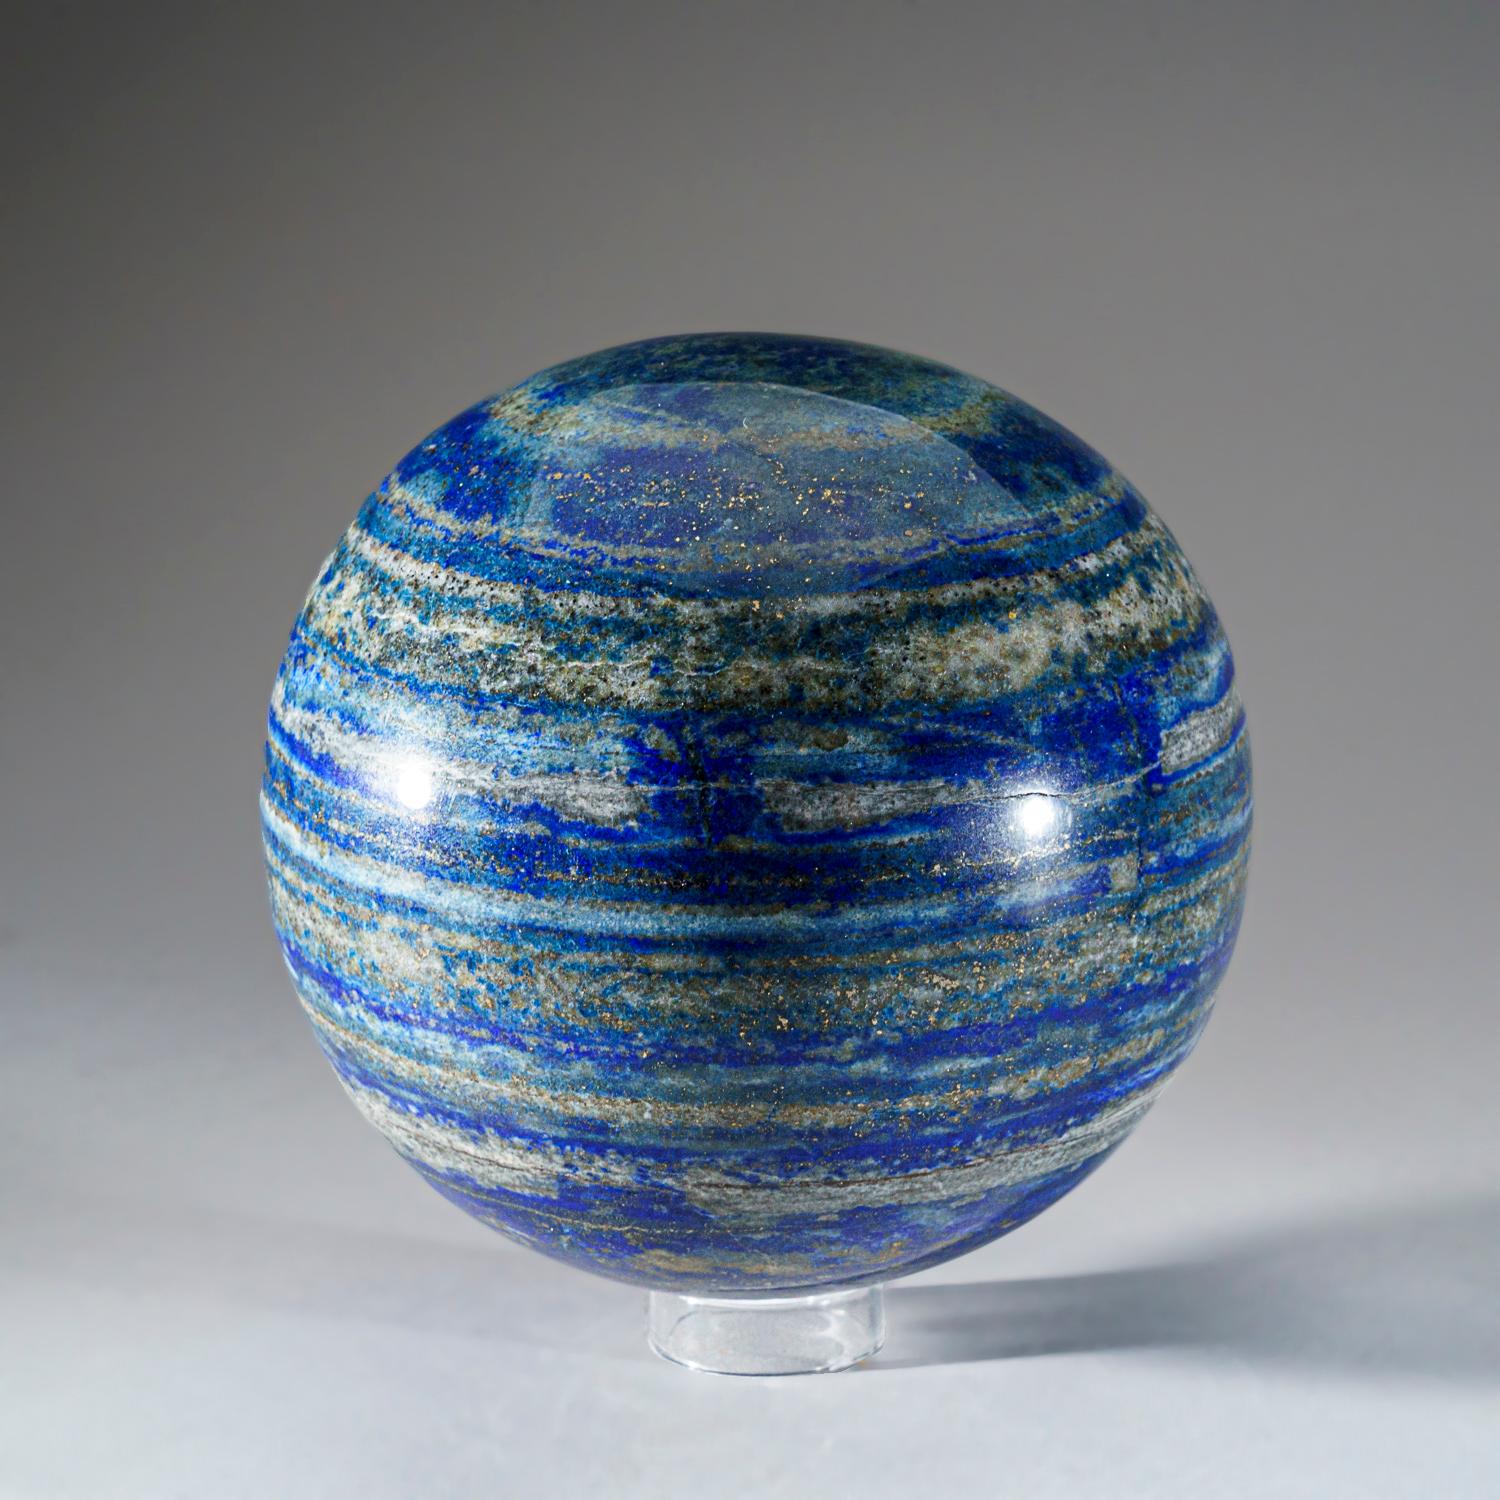 Crystal Polished Lapis Lazuli Sphere from Afghanistan (5